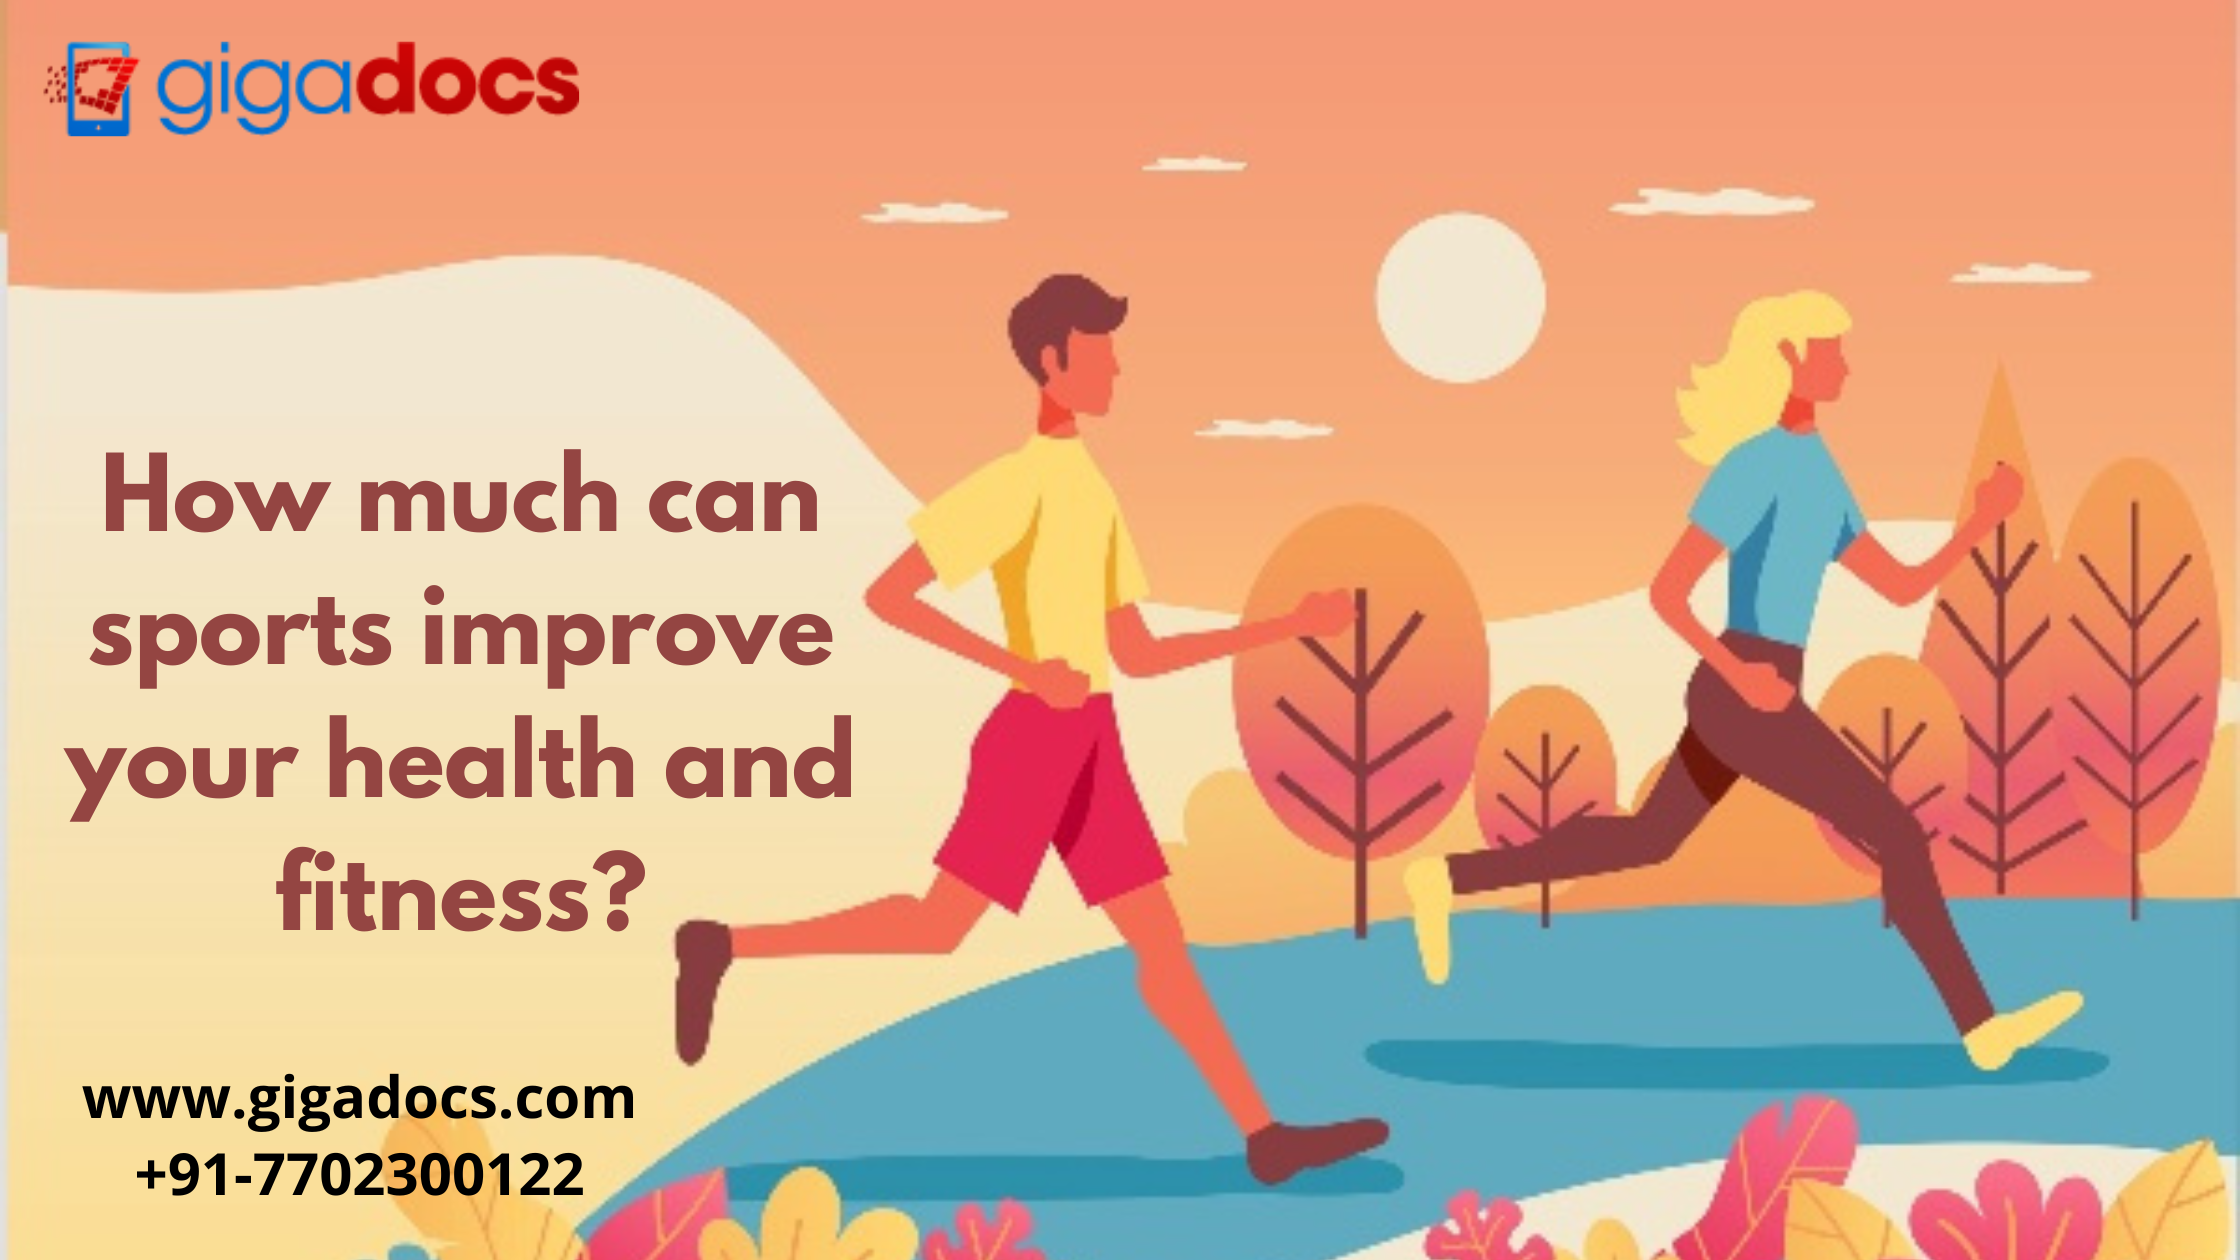 https://www.gigadocs.com/blog/wp-content/uploads/2022/09/How-much-can-sports-improve-your-health-and-fitness.png